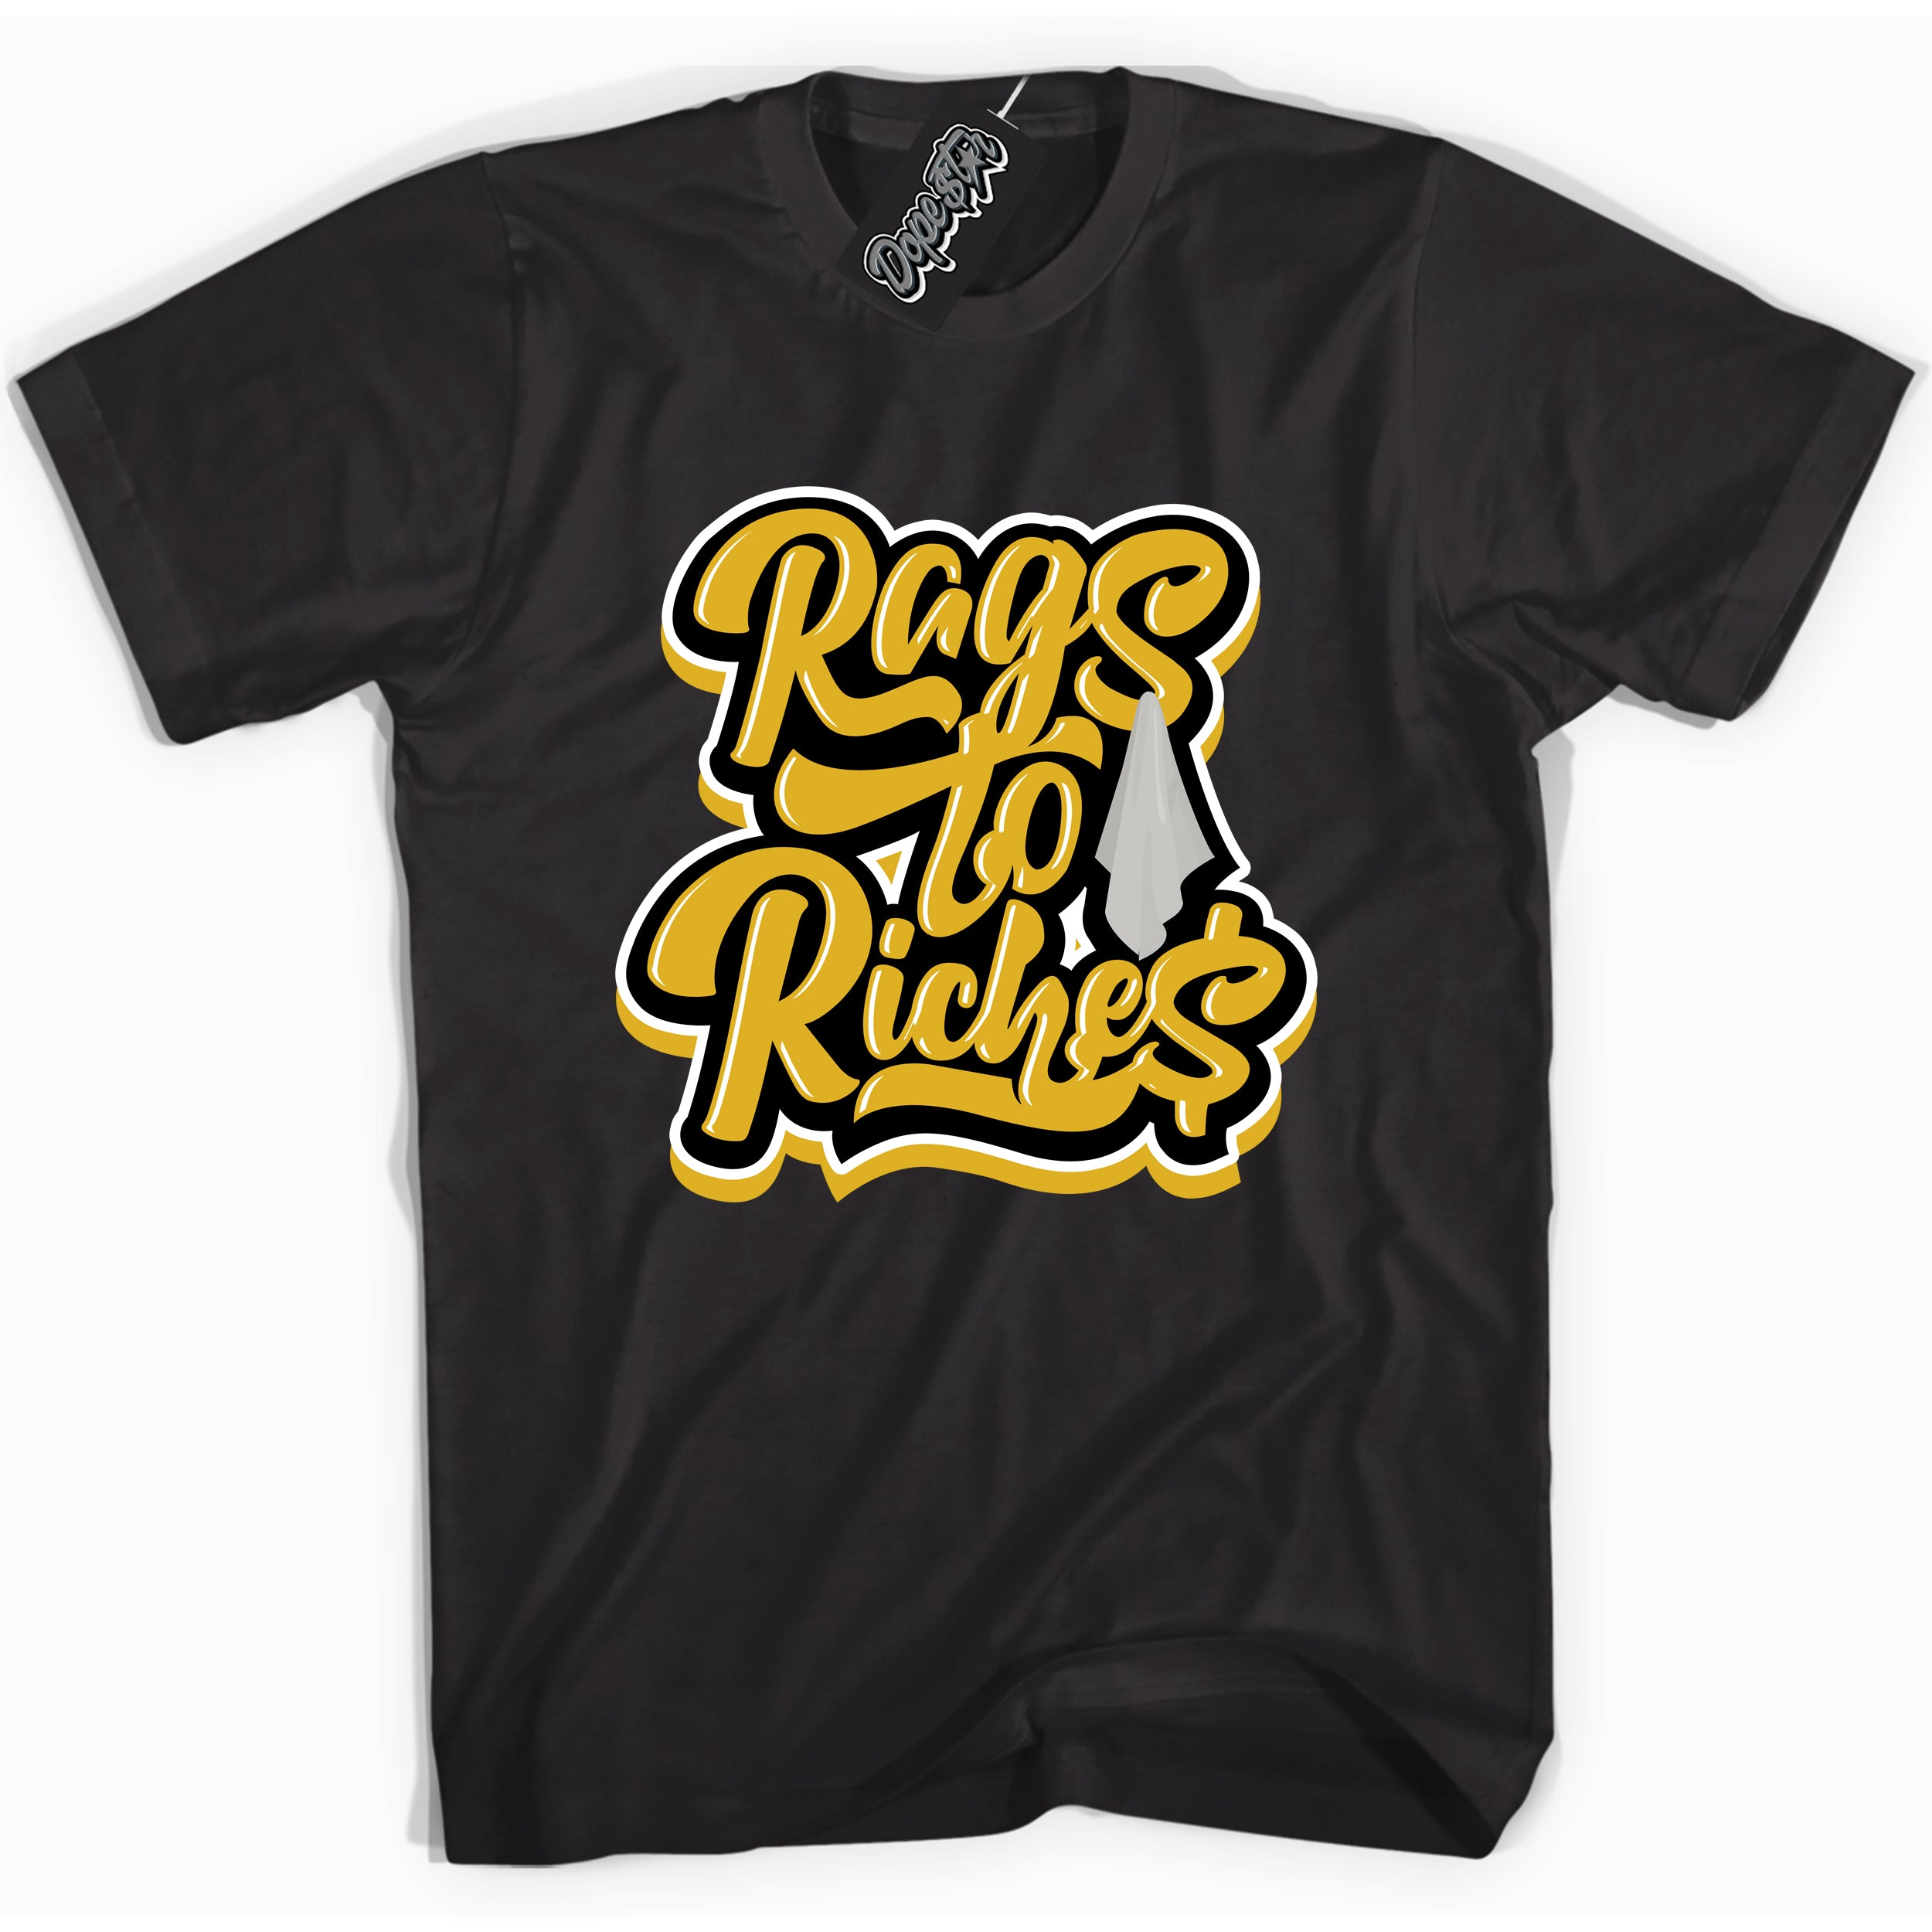 Cool Black Shirt with “ Rags To Riches” design that perfectly matches Yellow Ochre 6s Sneakers.